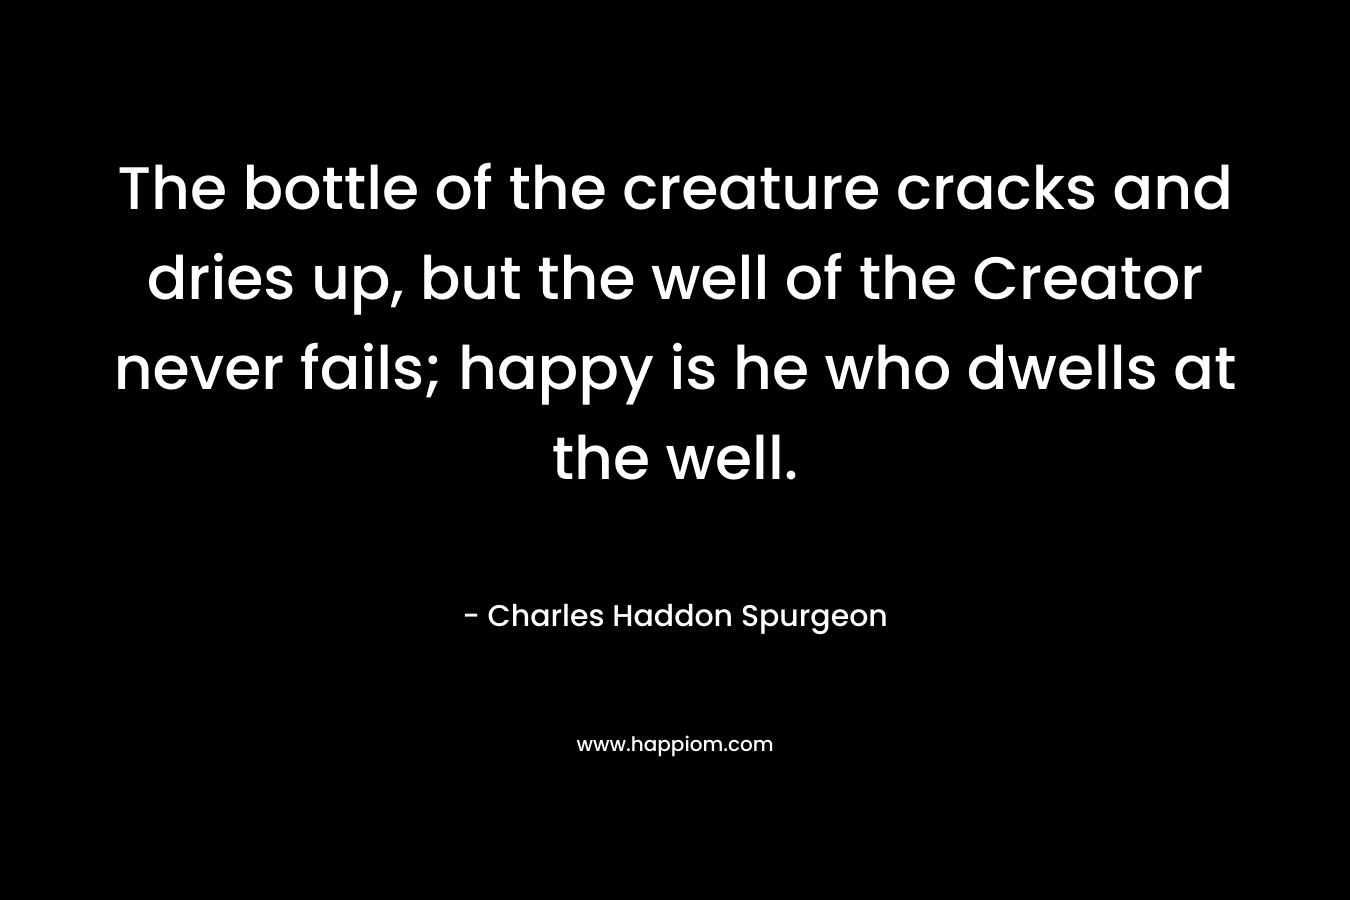 The bottle of the creature cracks and dries up, but the well of the Creator never fails; happy is he who dwells at the well. – Charles Haddon Spurgeon